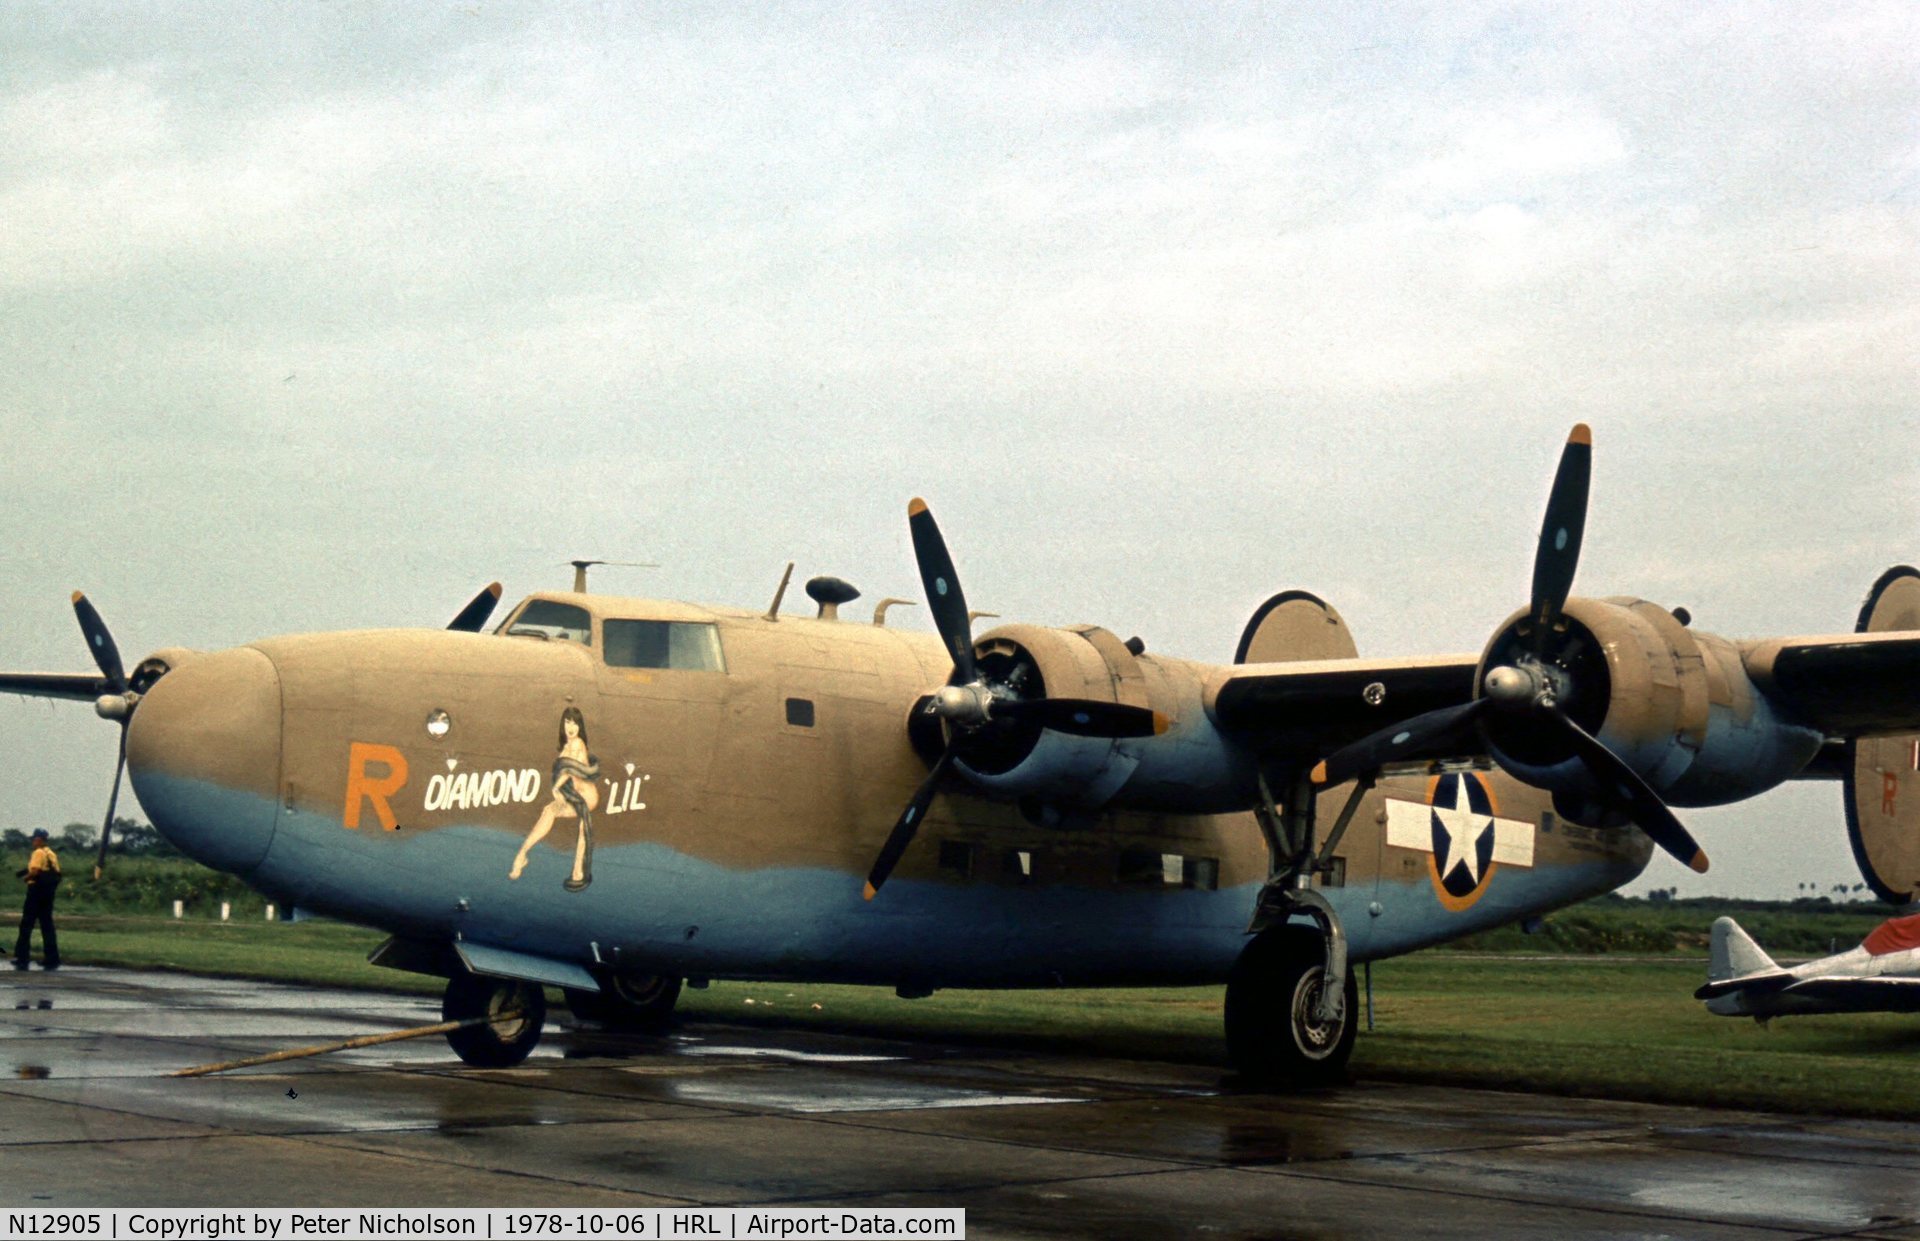 N12905, 1940 Consolidated Vultee RLB30 (B-24) C/N 18, The Confederate Air Force's 